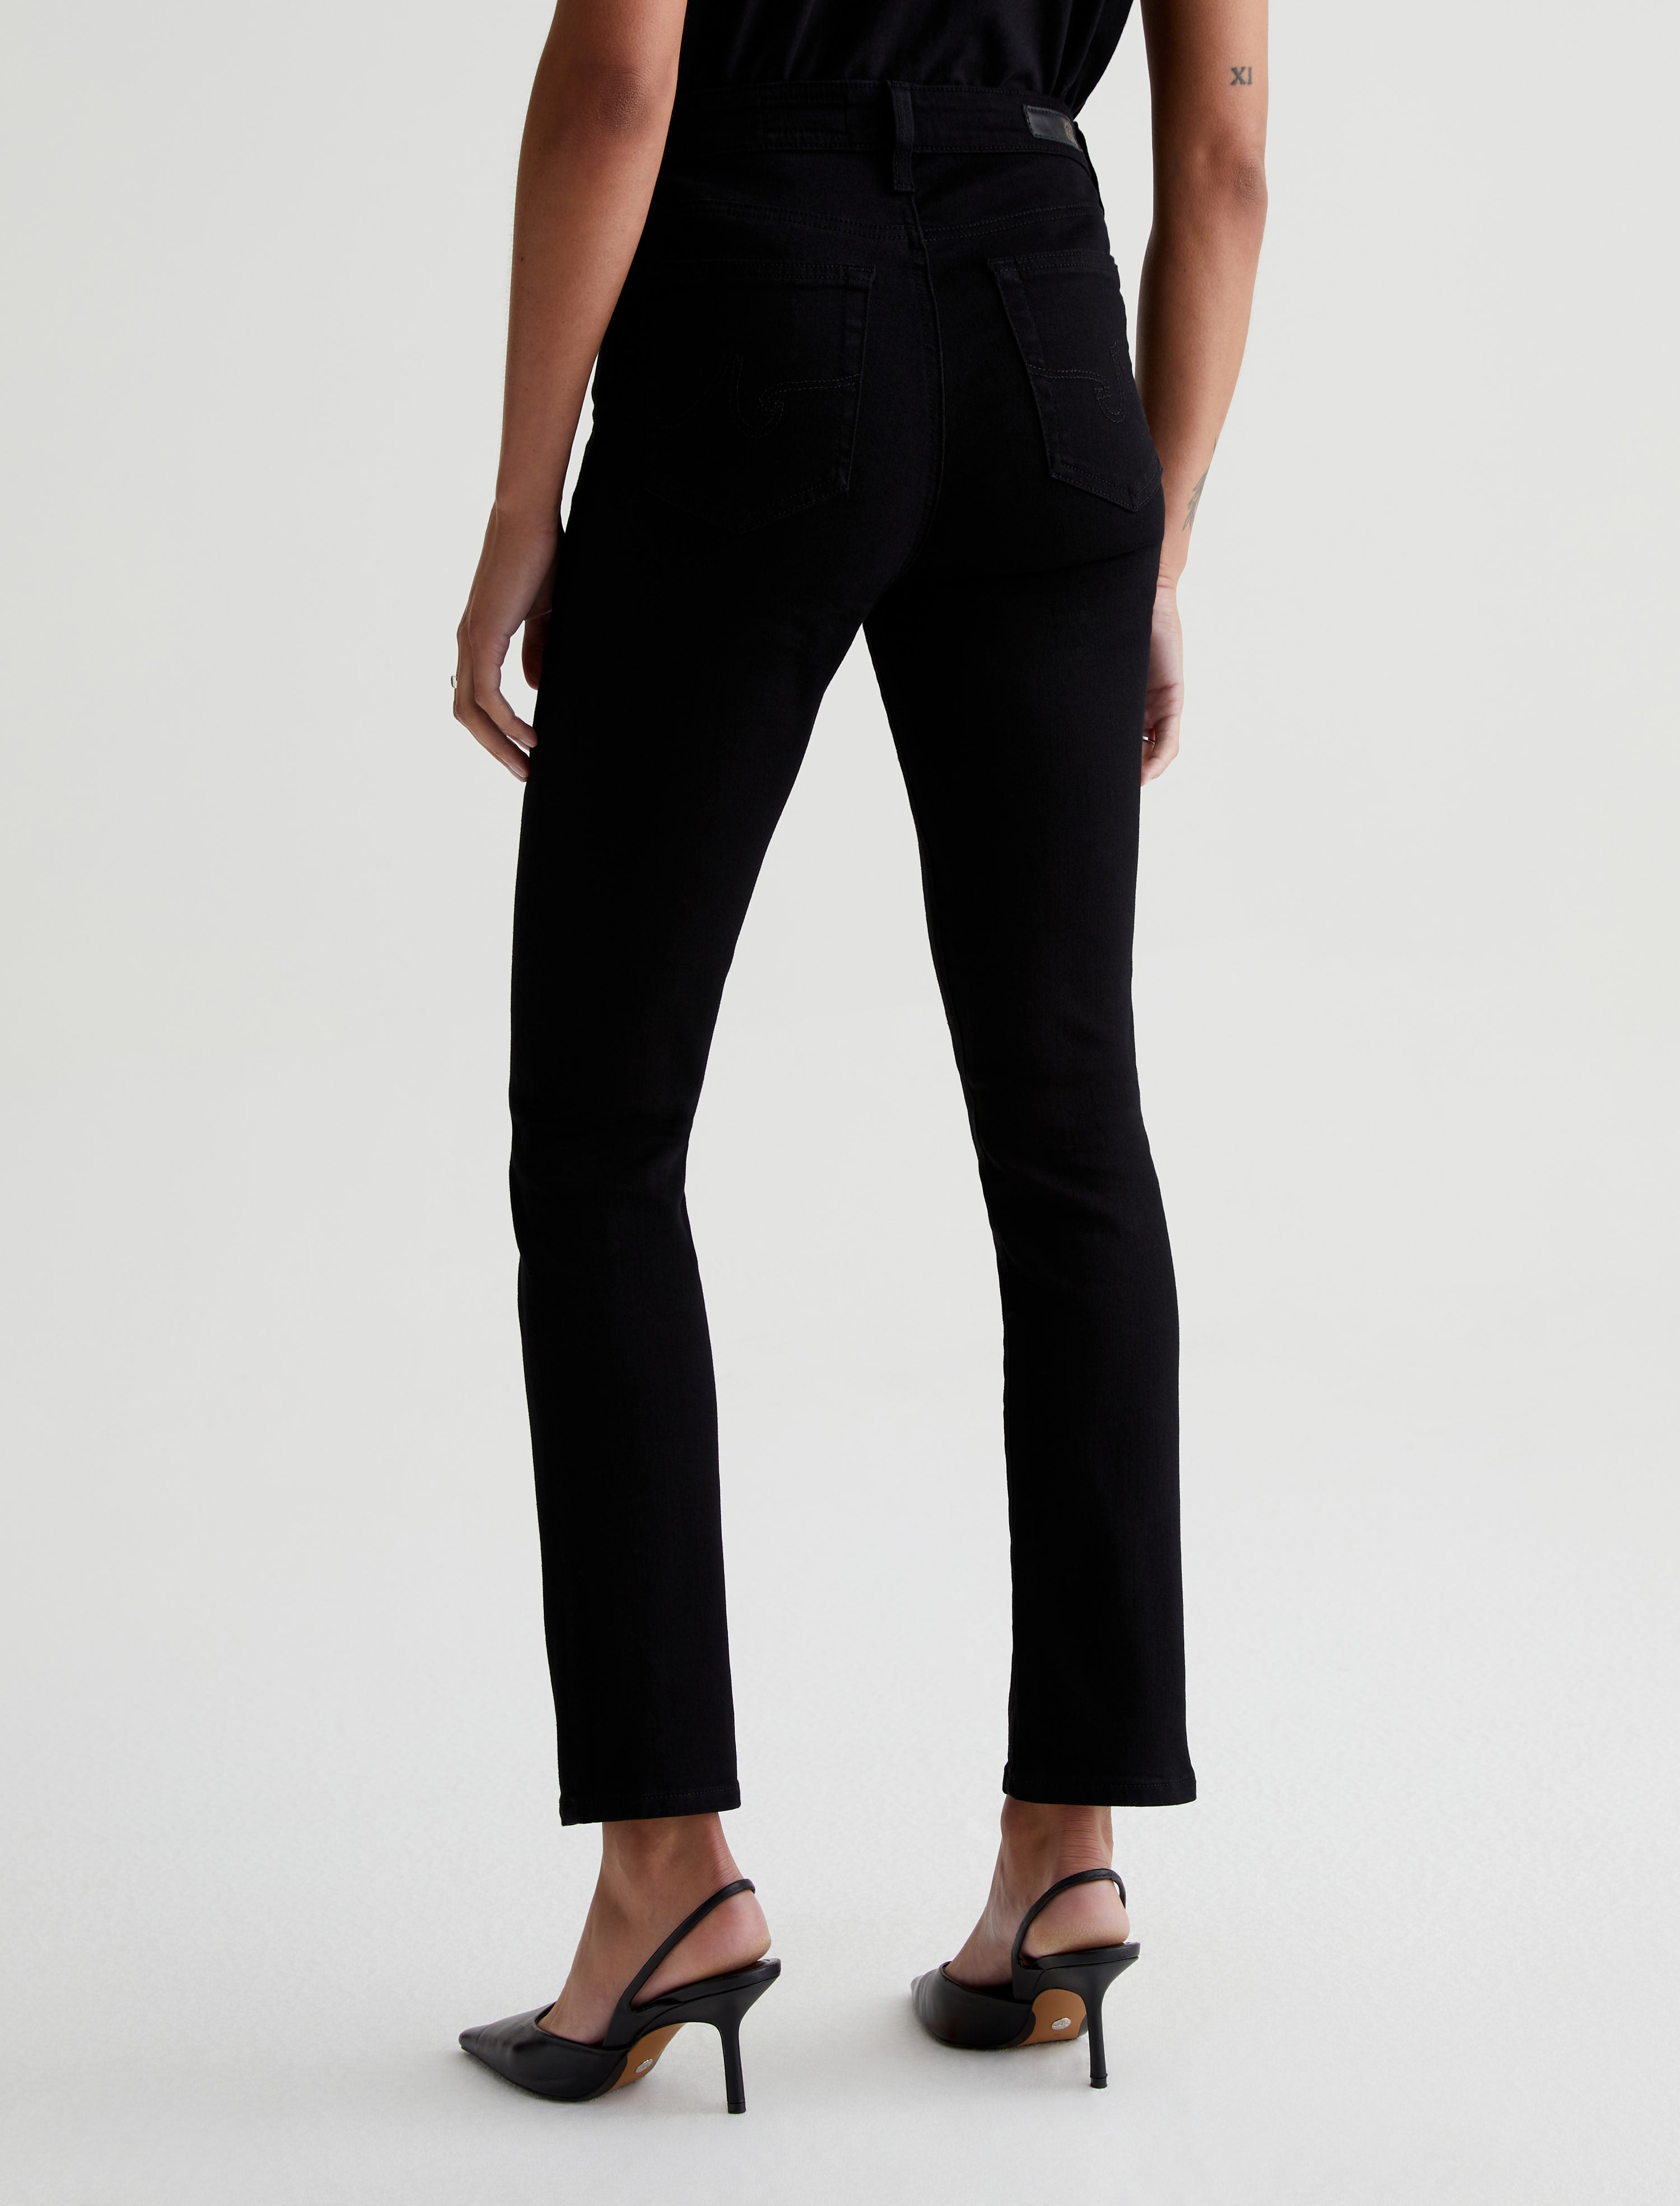 Womens Mari Opulent Black at AG Jeans Official Store